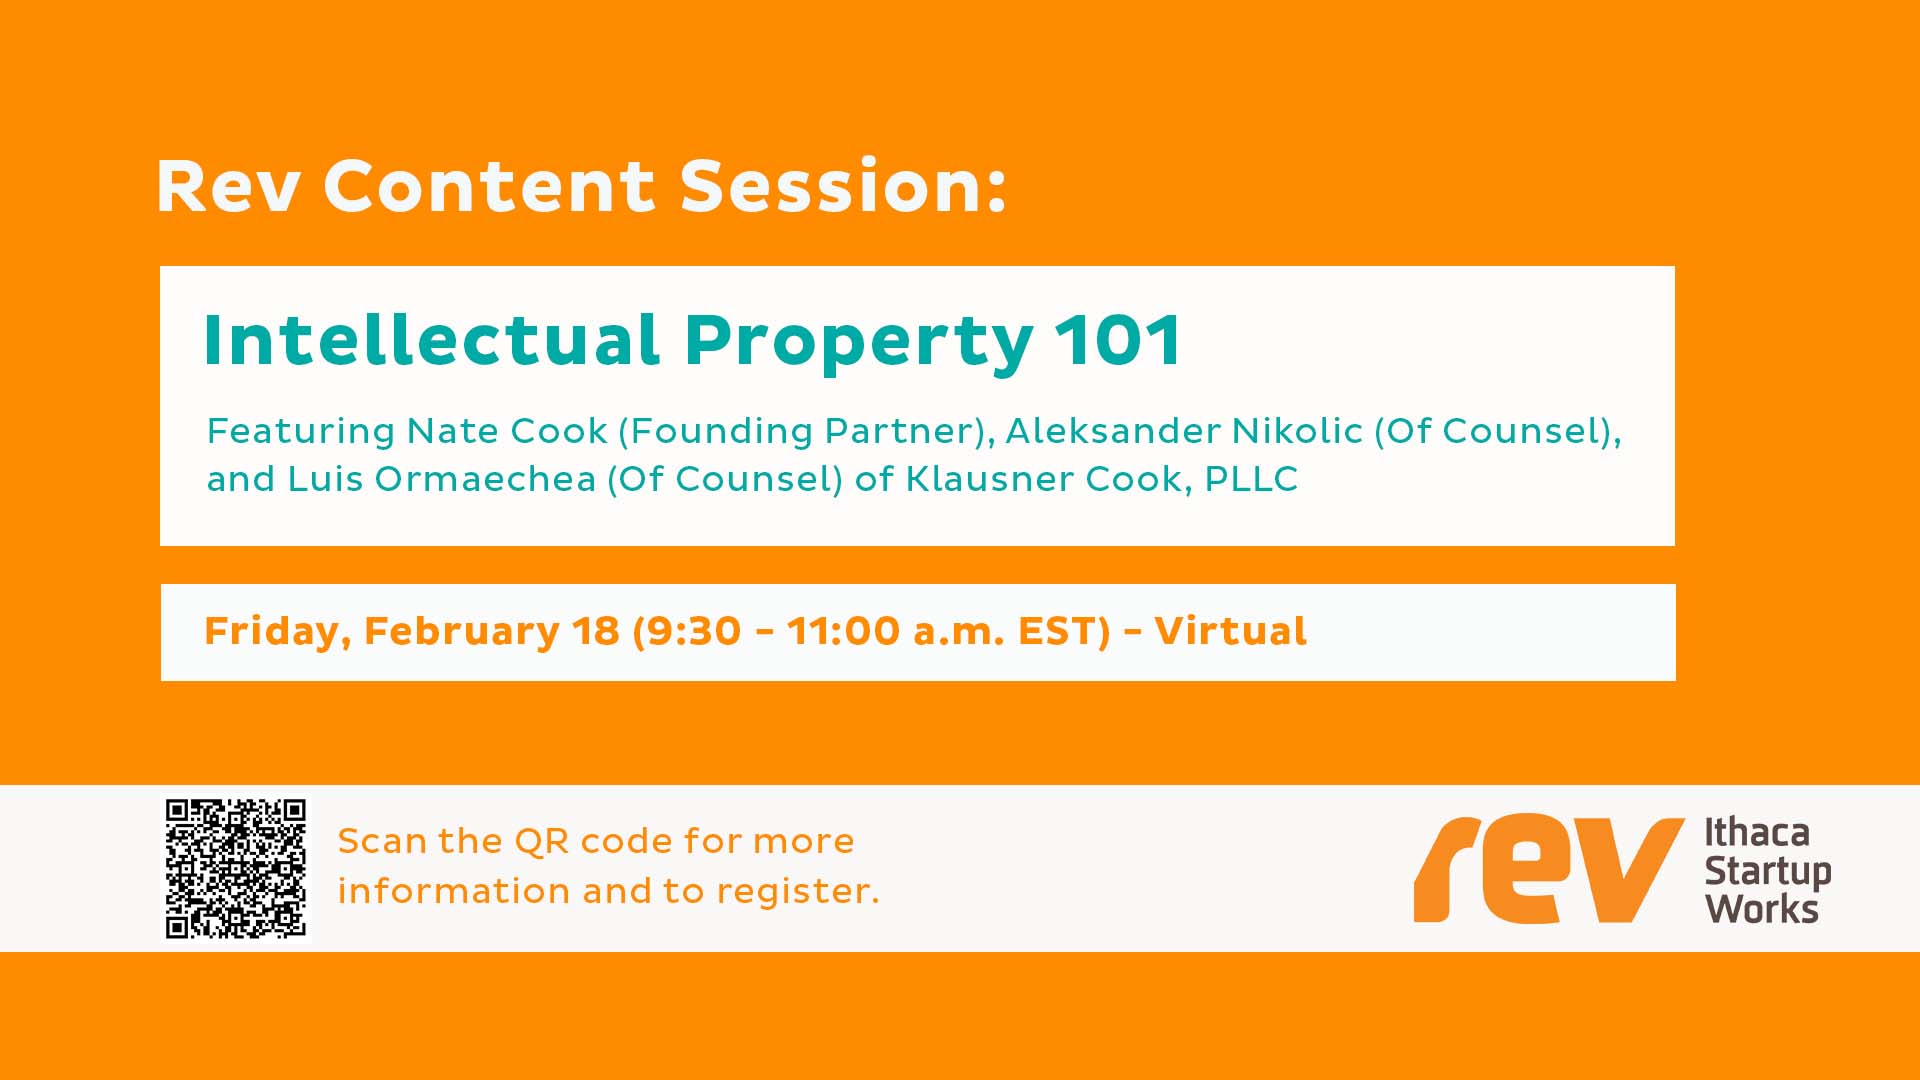 Rev Content Session: Intellectual Property 101. Featuring Nate Cook (Founding Partner), Aleksander Nikolic (Of Counsel), and Luis Ormaechea (Of Counsel) of Klausner Cook, PLLS.